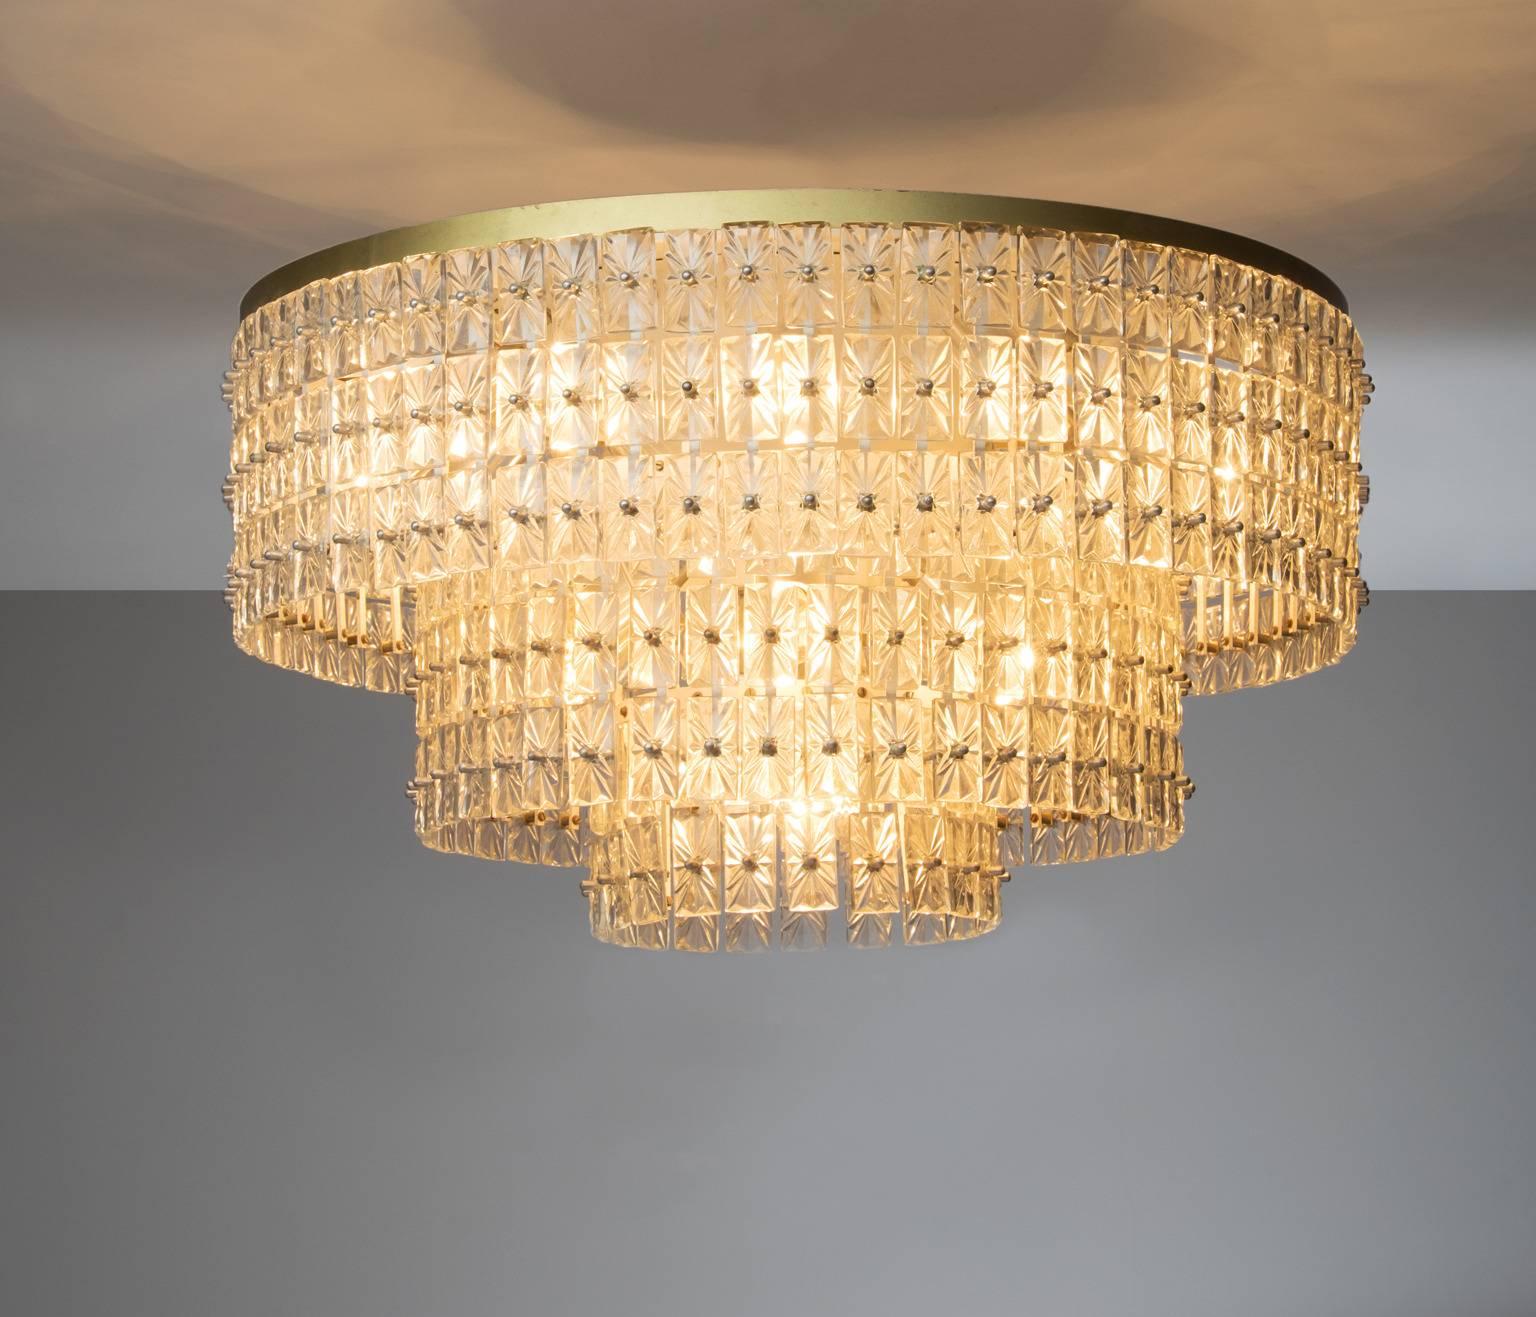 Extraordinary large chandelier in glass and brass, Austria, 1950s.

This wonderful ceiling lamp has a basic shape, built from a large amount of well detailed glass elements. They are mounted to a sincere construction, and beautifully enlightened by